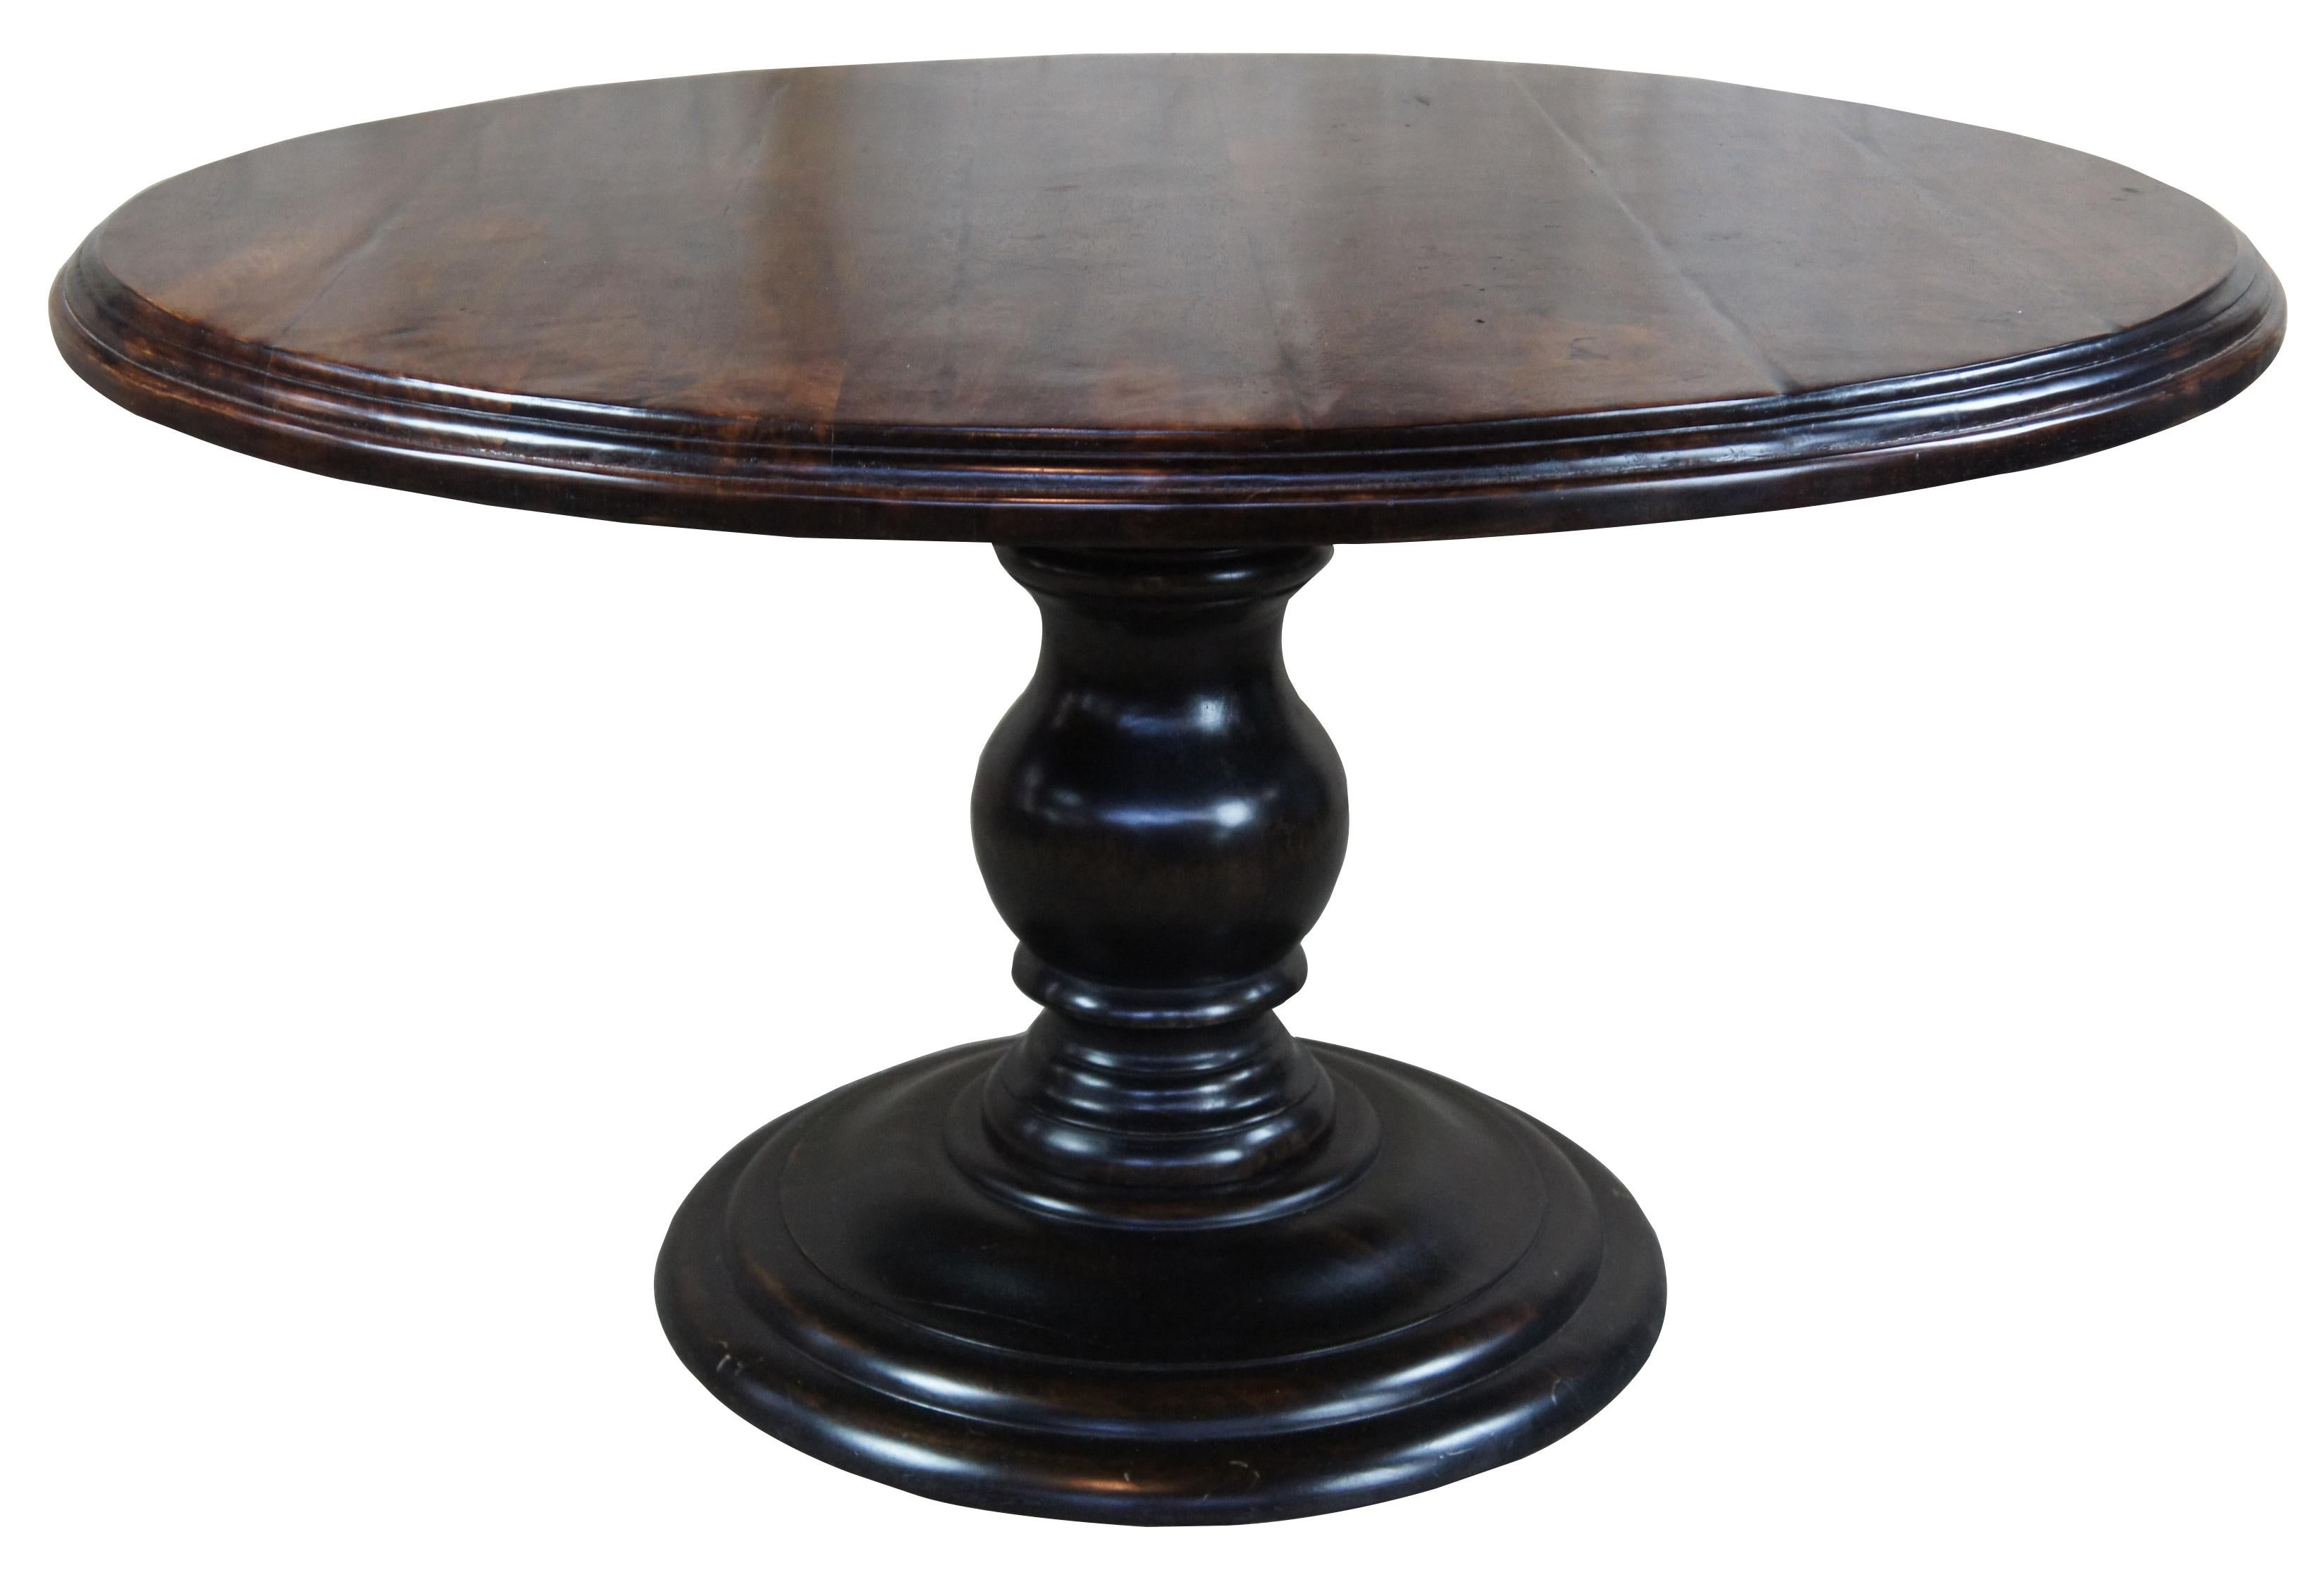 Arhaus round dining table with pedestal base. Features a plank inspired top over a turned baluster base.